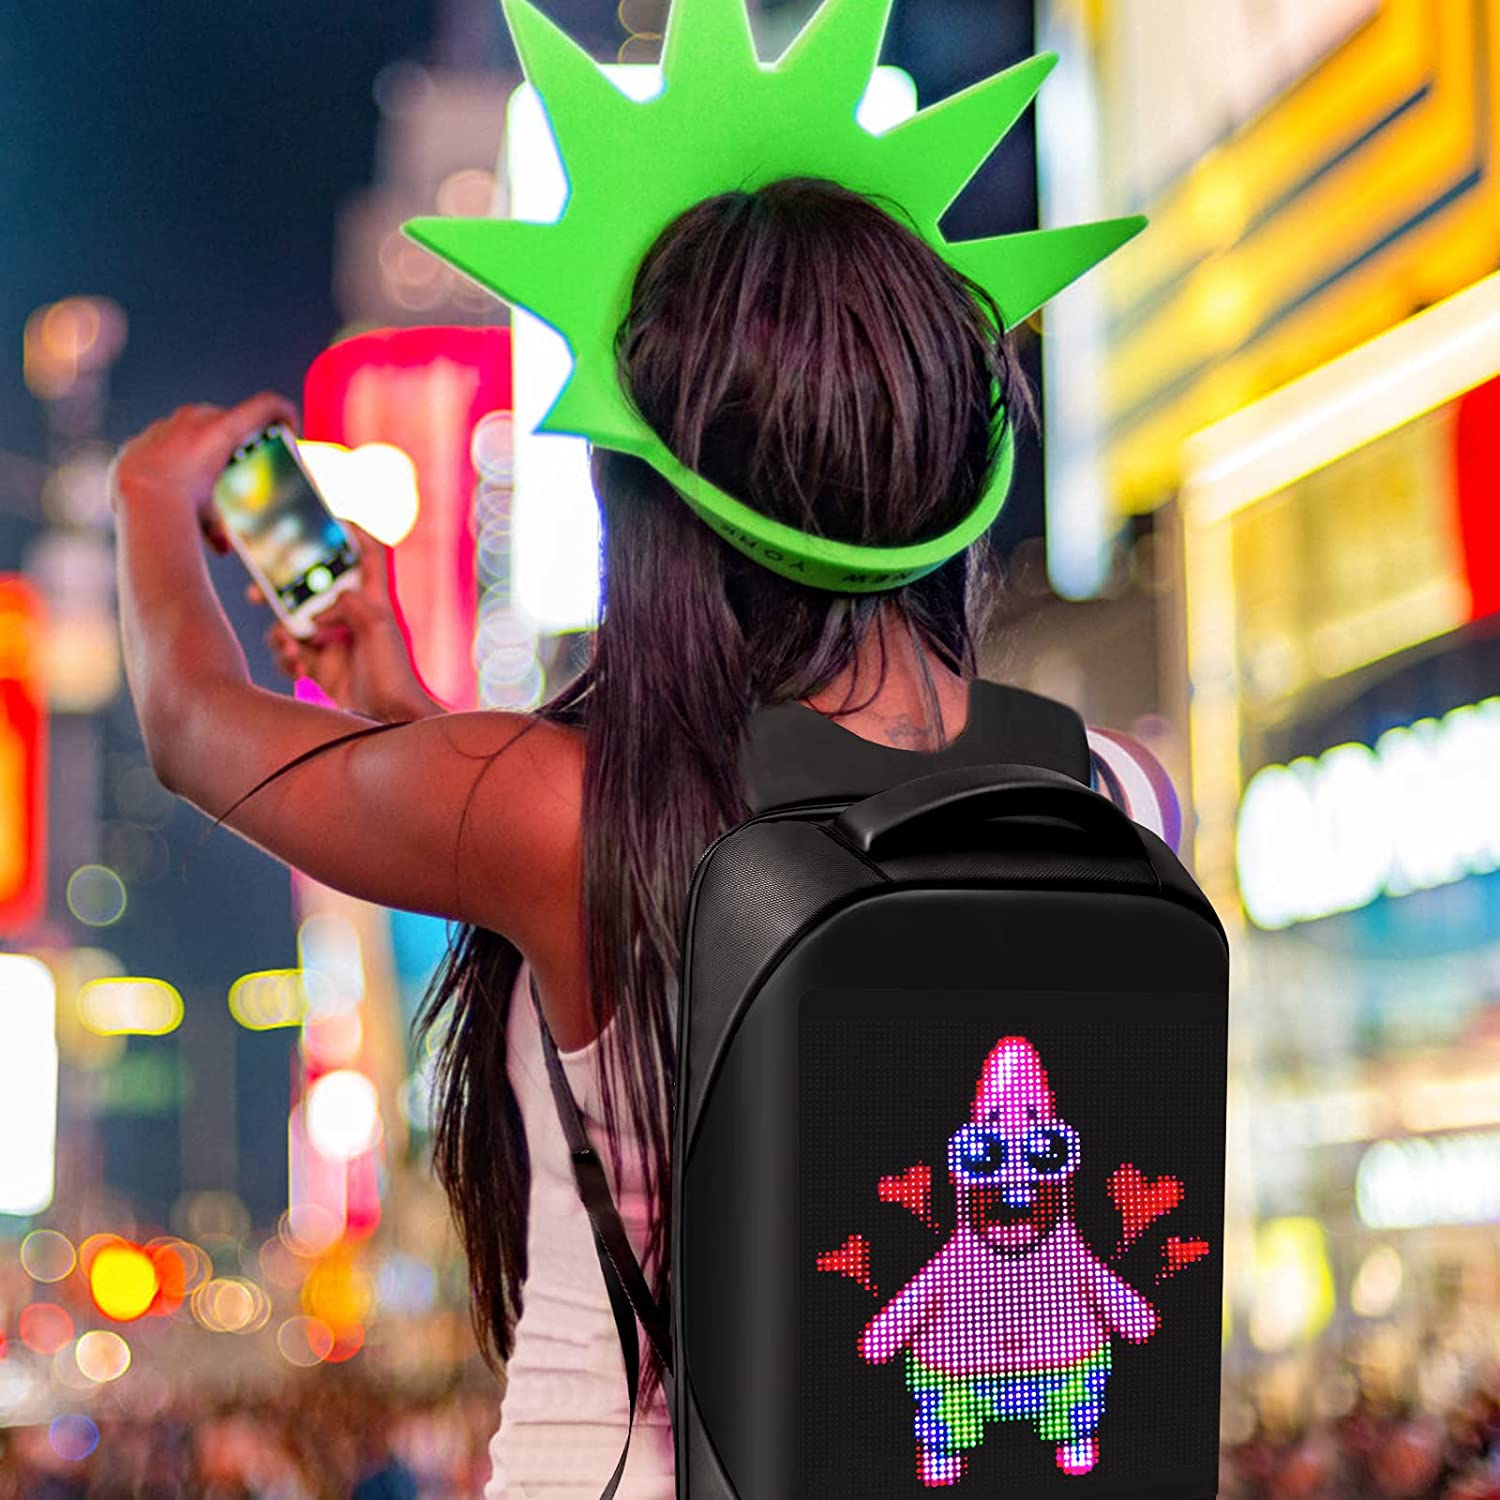 LED Display Backpack Illuminated WiFi Luminous MultiFunction Waterproof  Bag for Advertising Confession Innovative Gifts20L 25 x 25cmPink   Amazonin Sports Fitness  Outdoors